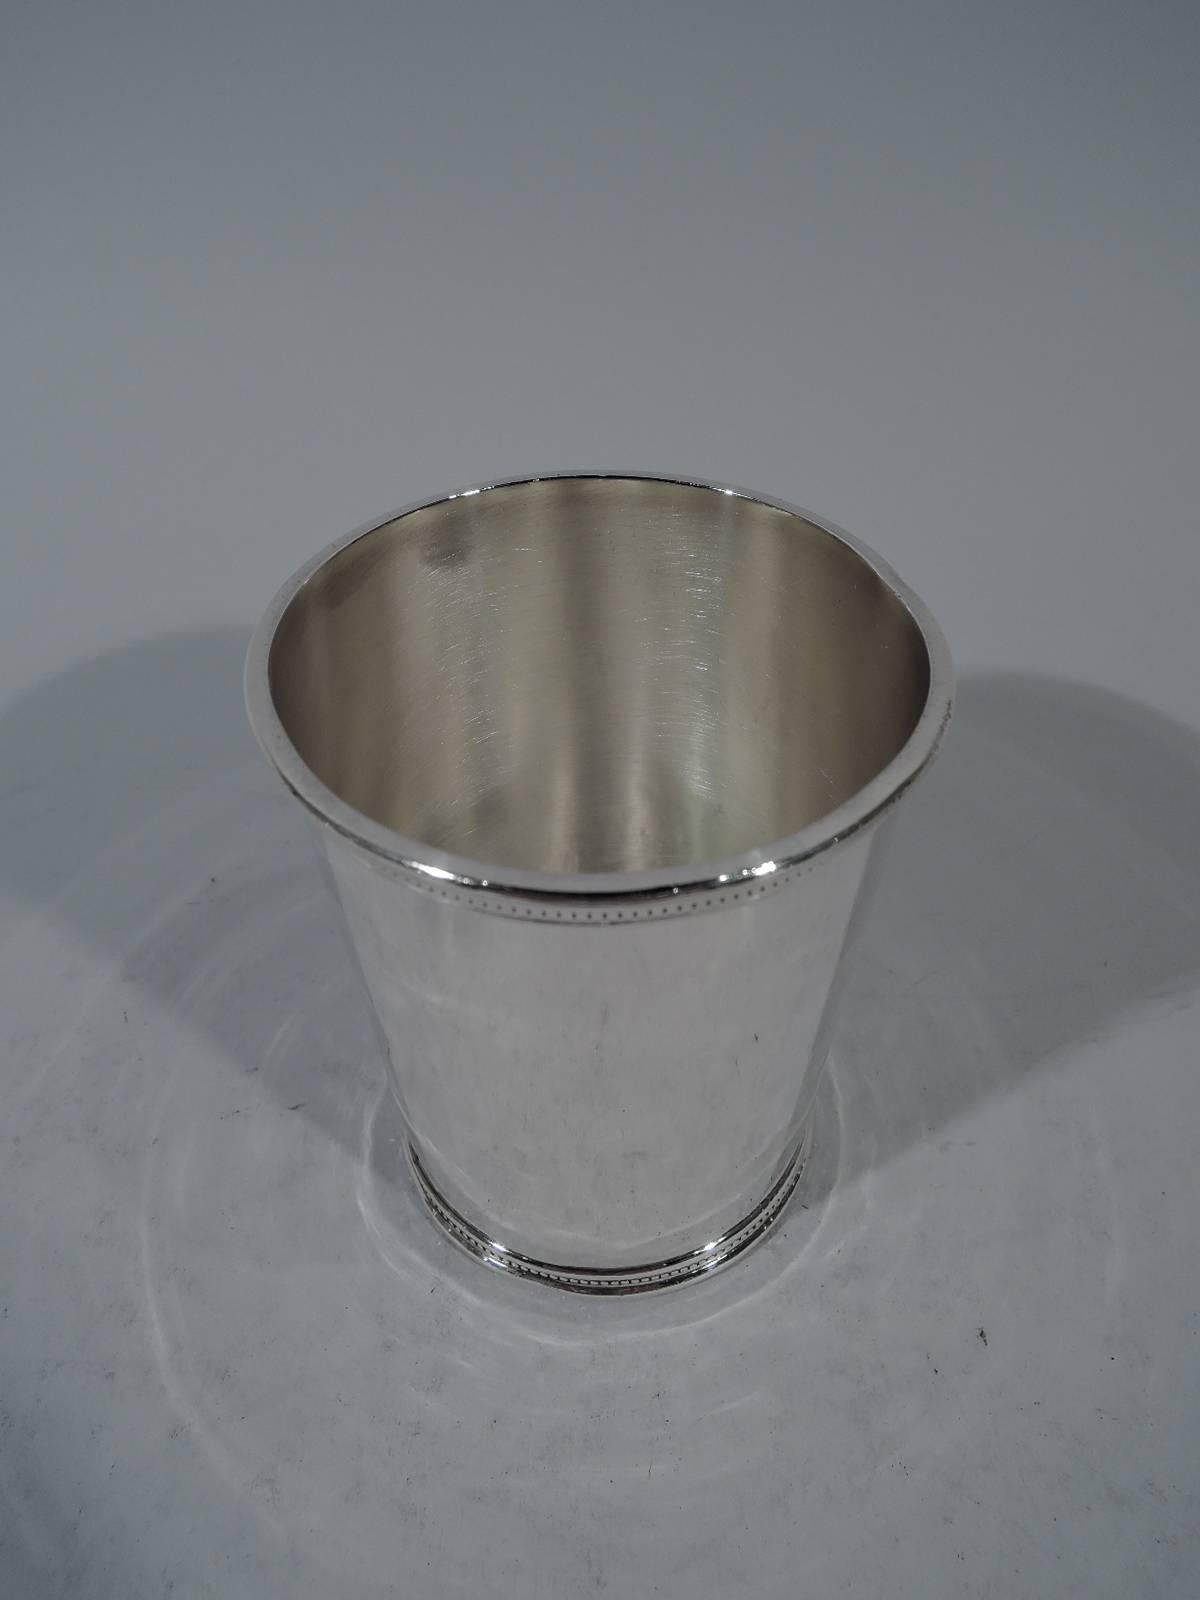 Kennedy-era sterling silver mint julep. Retailed by Scearce in Kentucy, 1961-1963. Traditional form with tapering sides and beading at rim and foot. Not many of these were made during the 35th president’s incomplete single term. Hallmark includes